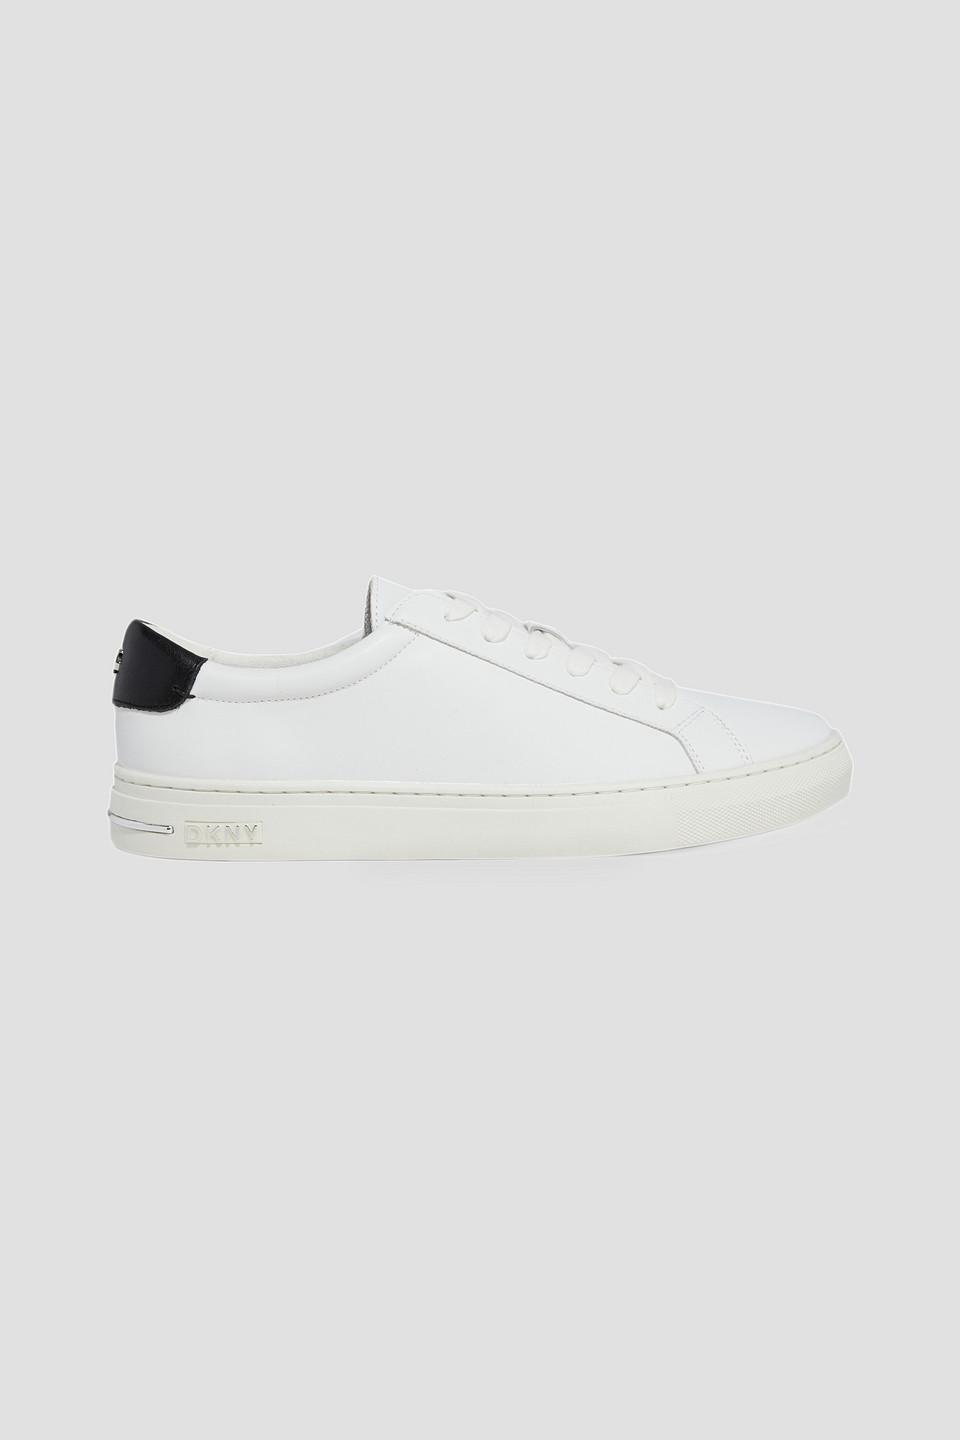 DKNY Court in White | Lyst